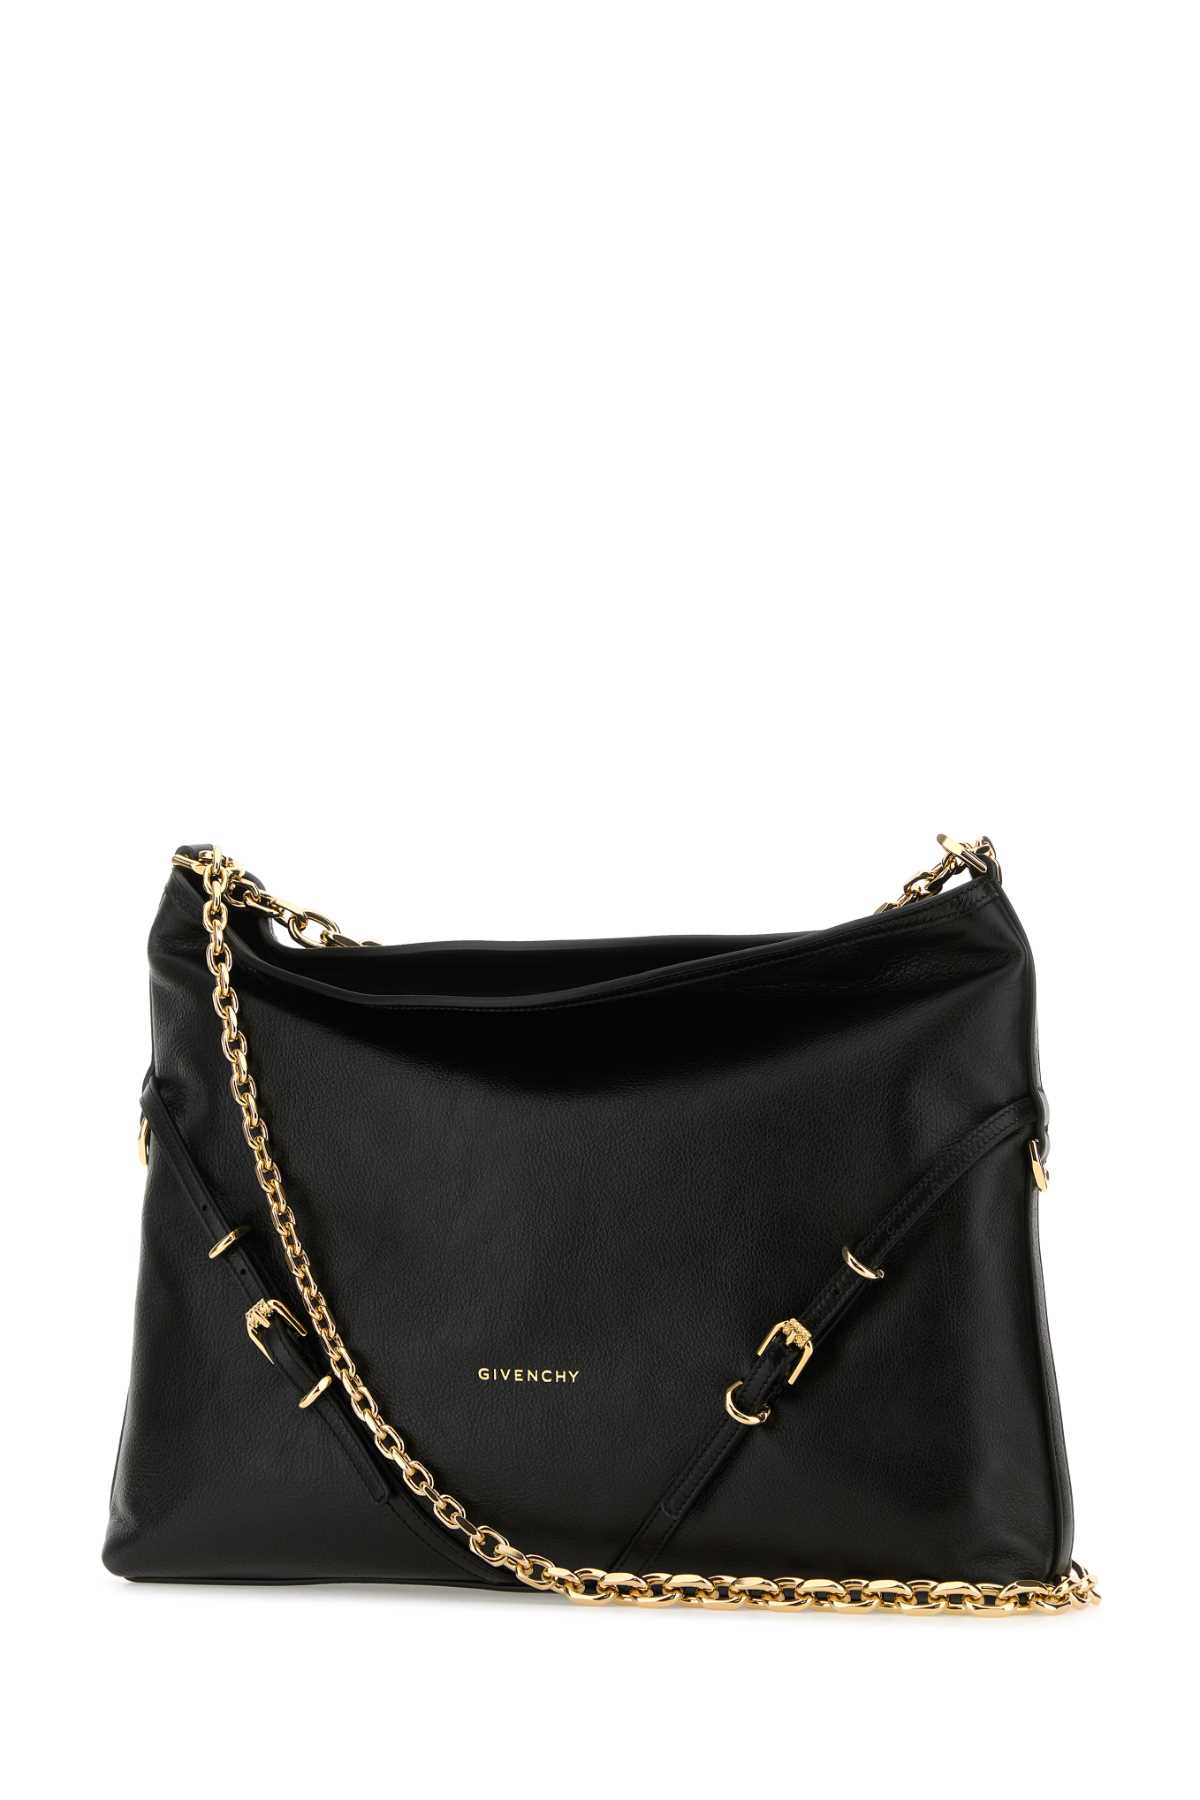 Givenchy Woman Black Leather Voyou Chain Shoulder Bag